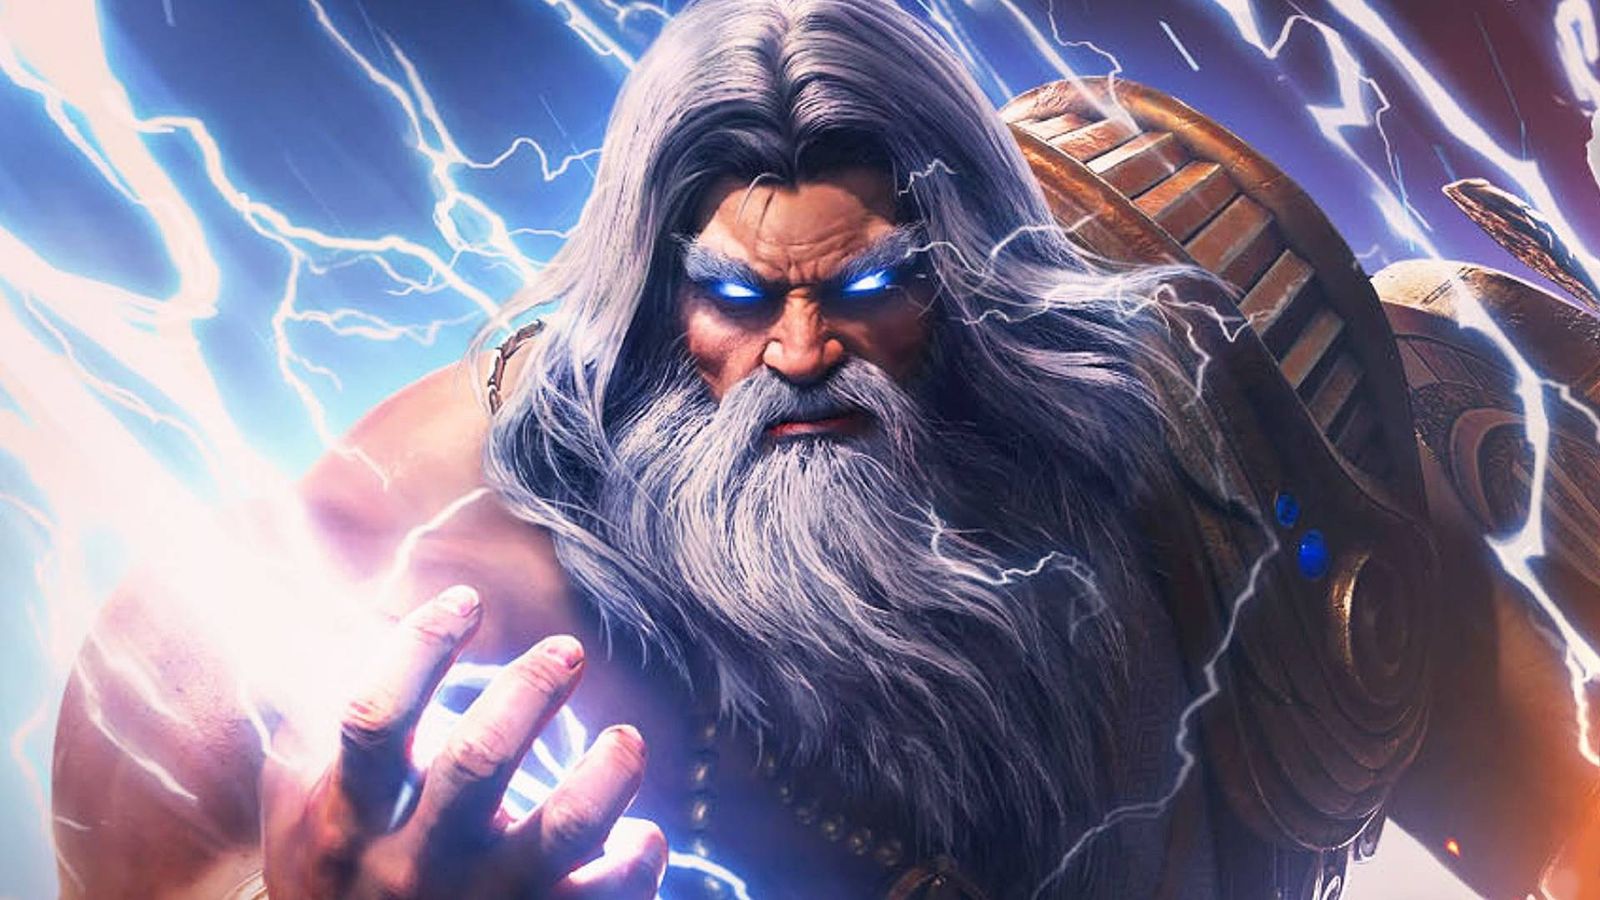 Zeus with his eyes lit up while grasping a lightning bolt and electricity cackling around his body